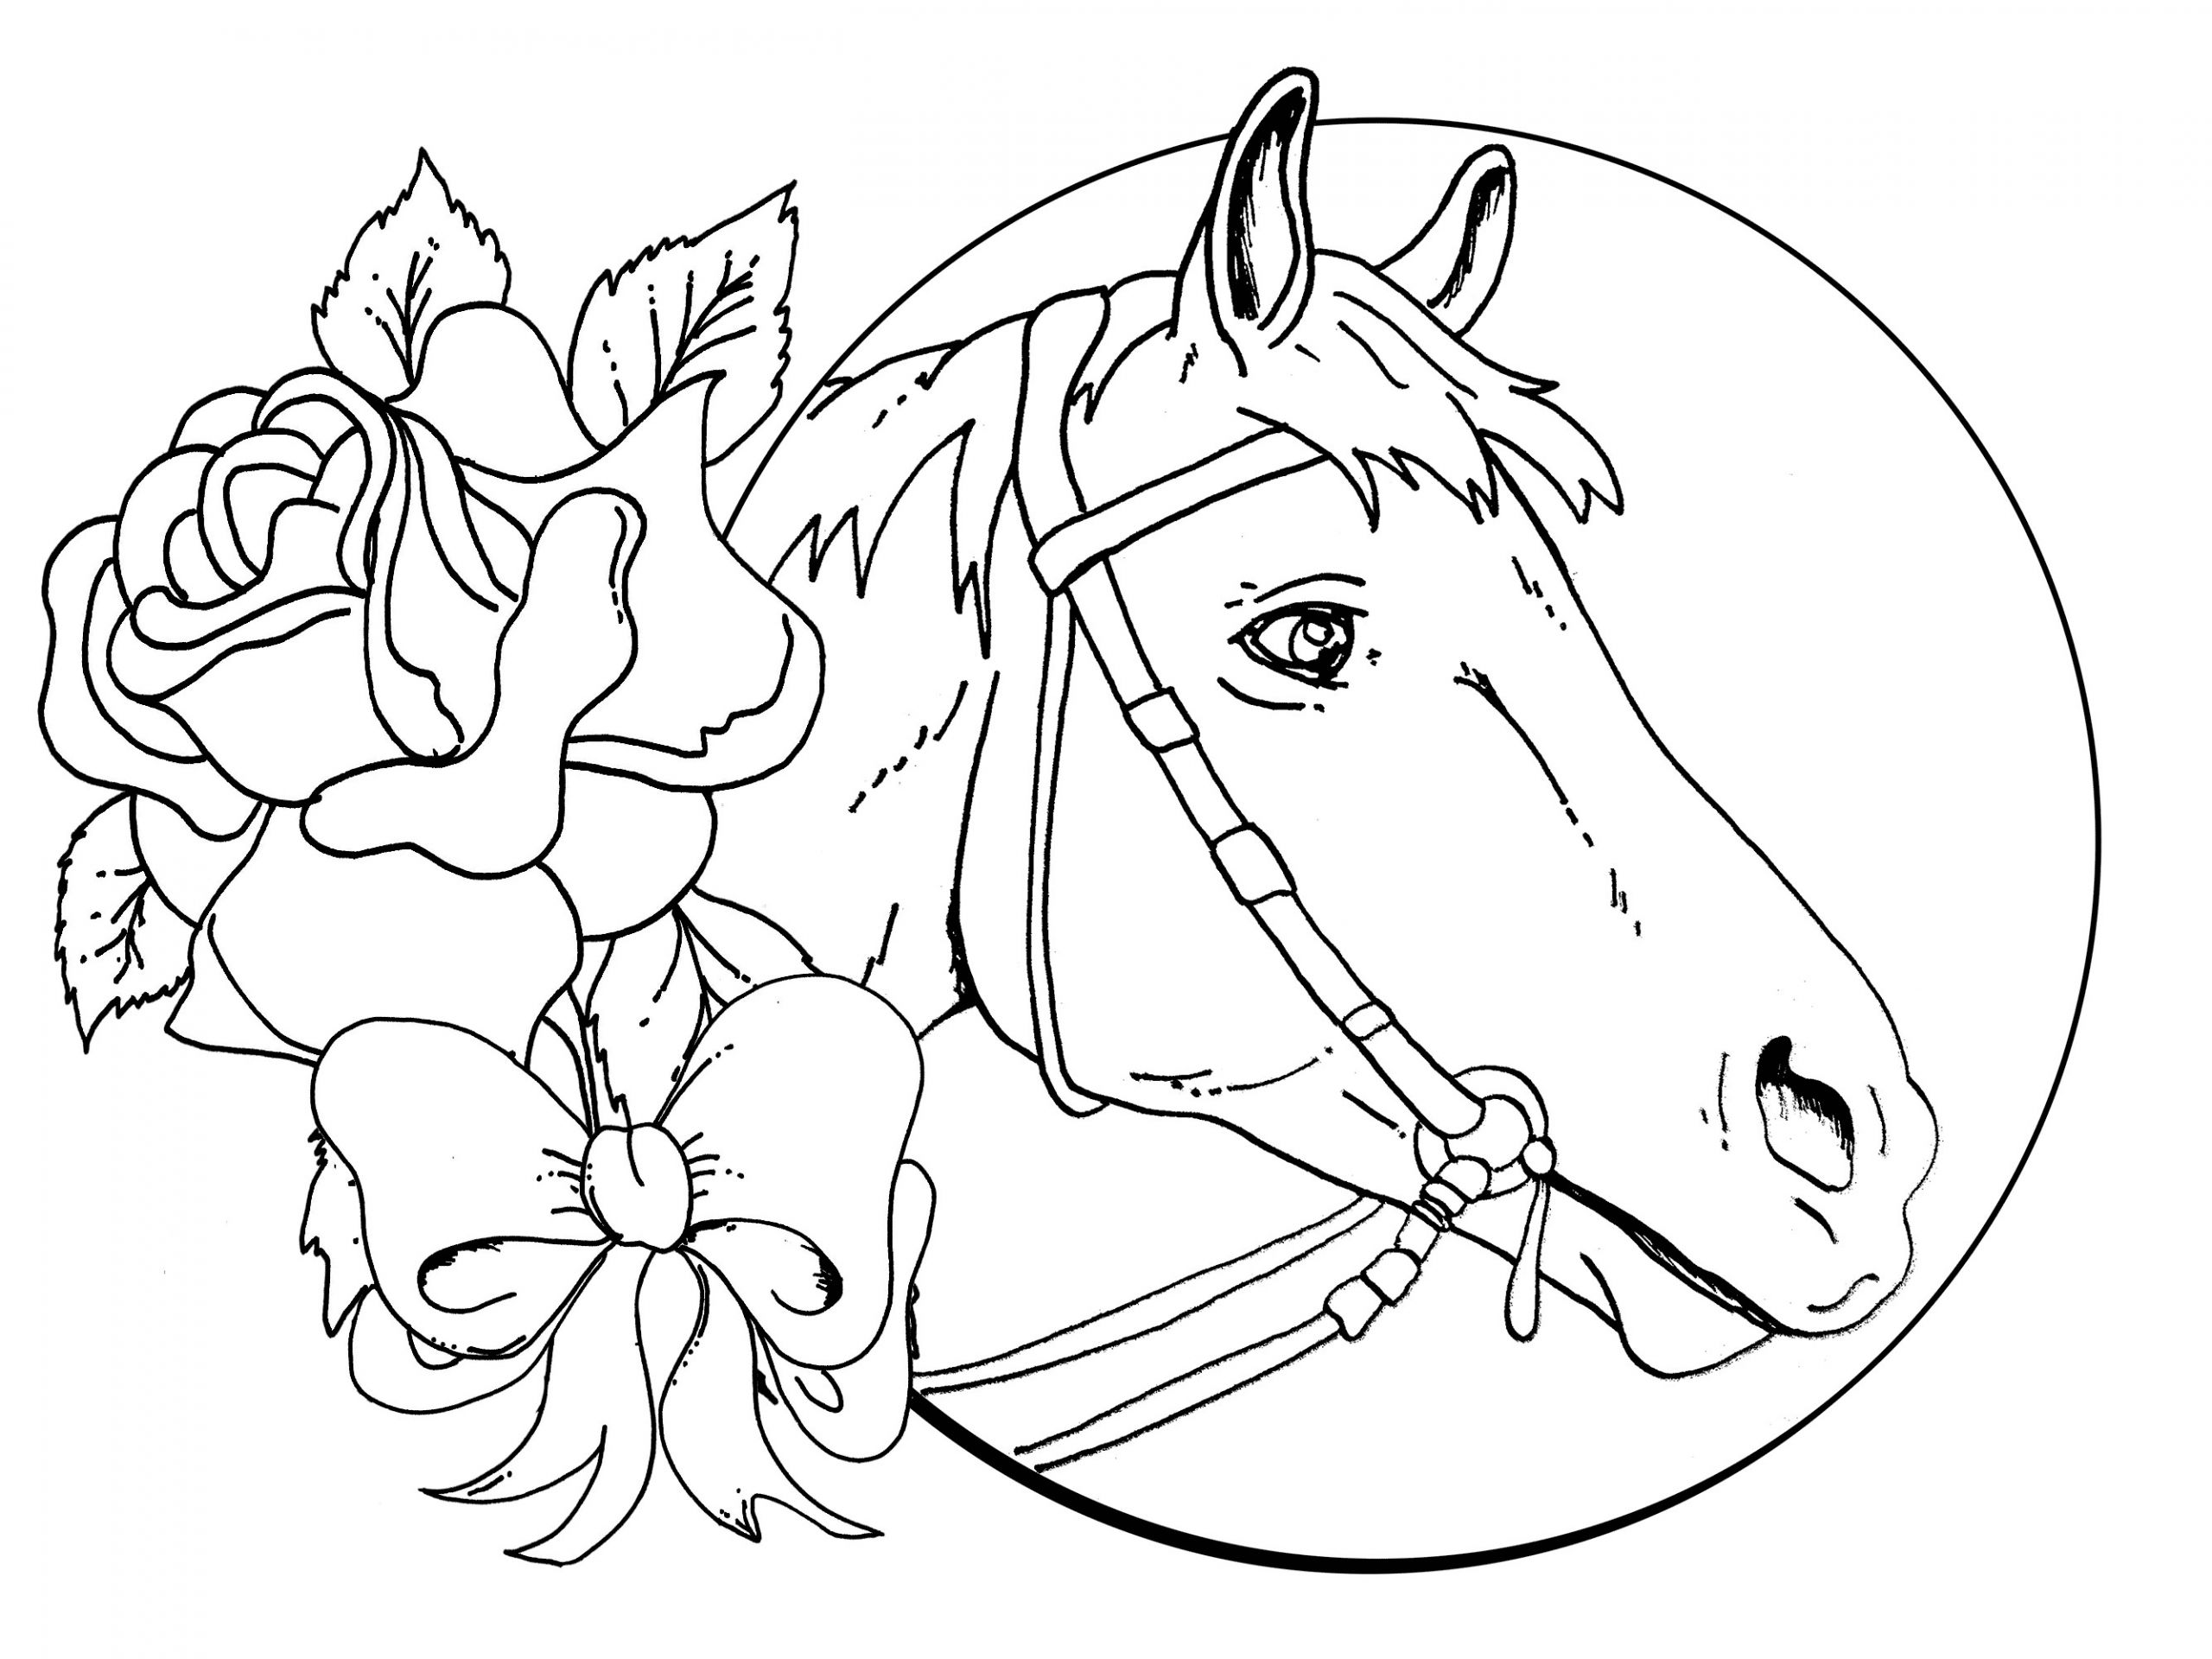 Adult Coloring Book Horse
 Free Horse Coloring Pages For Adults Charming Horse